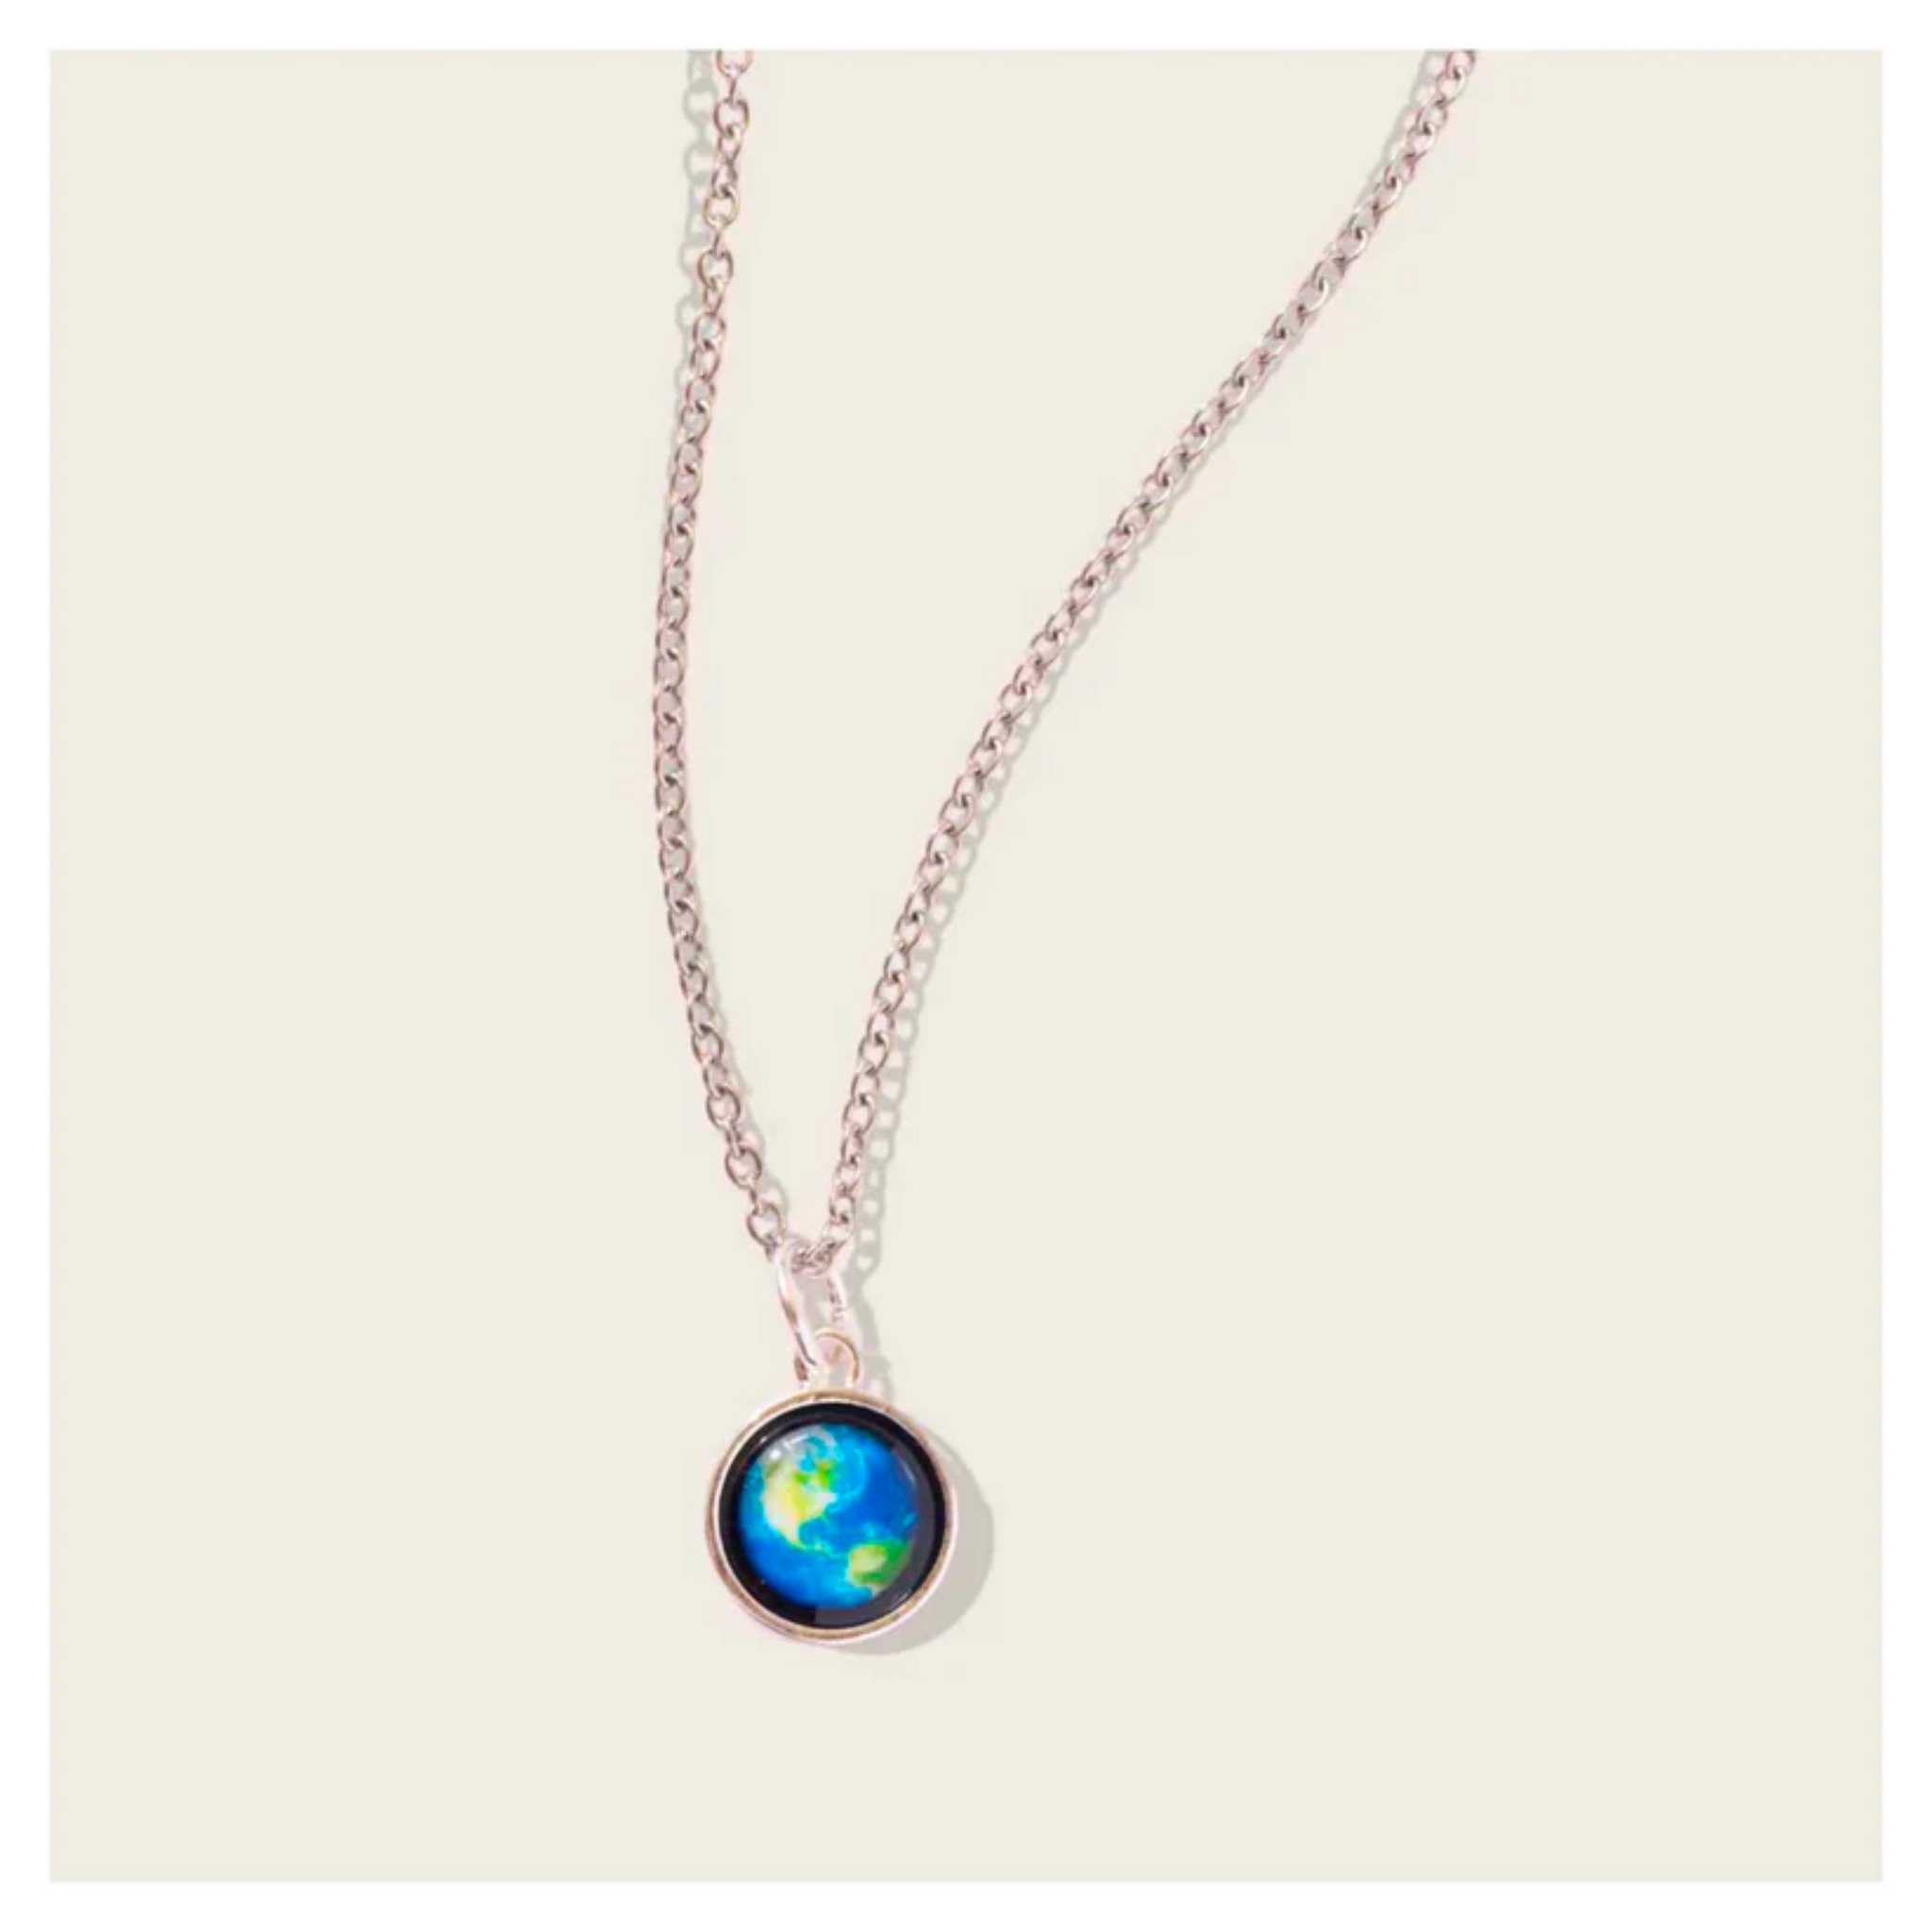 Earthglow Mini Silver Necklace